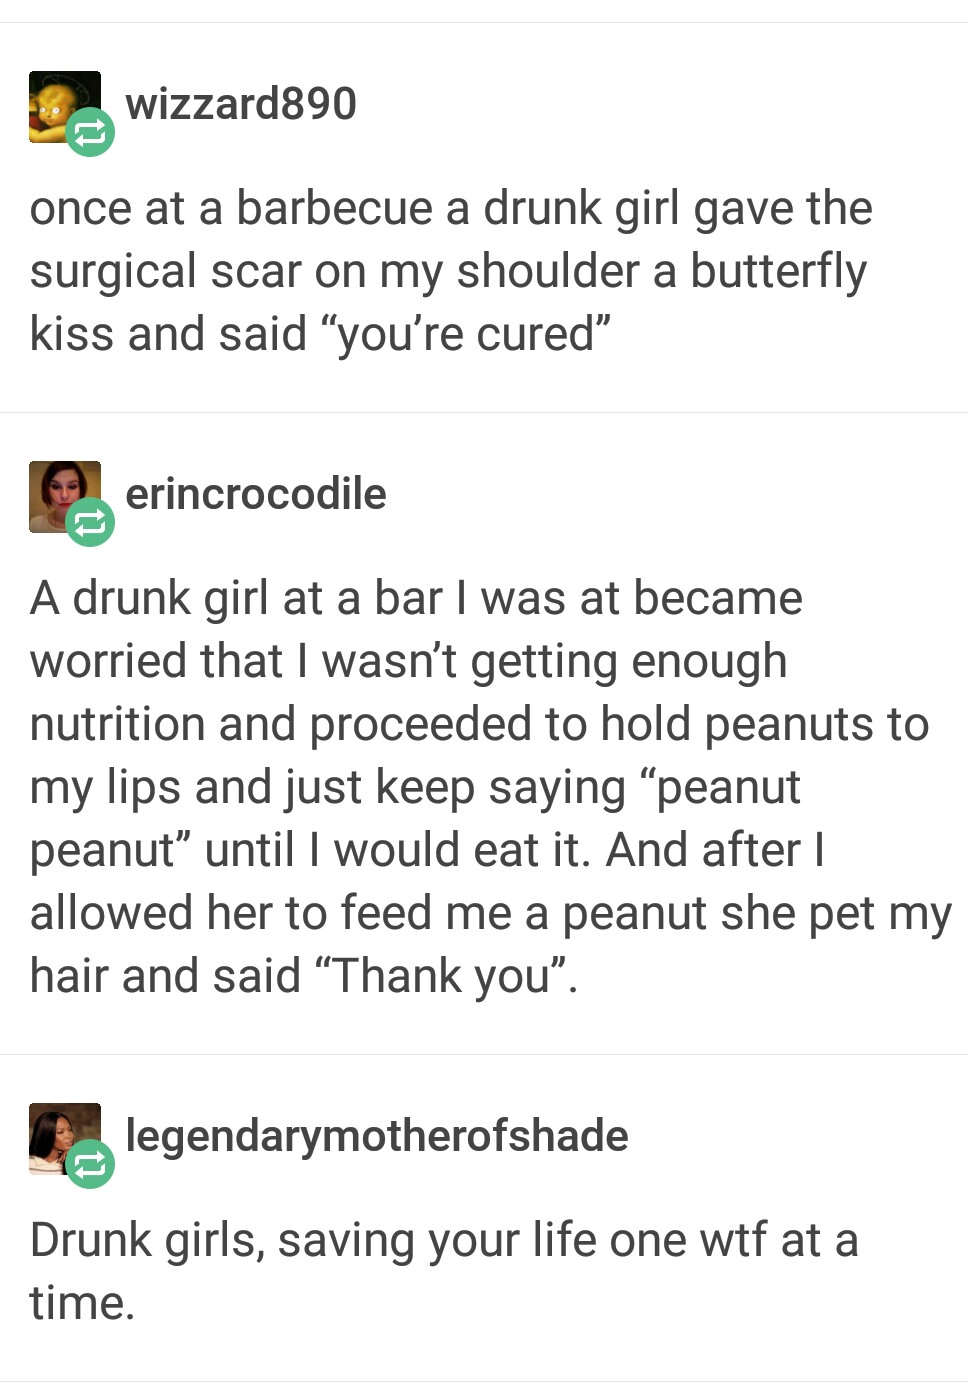 meme stream - drunk girl peanut peanut - wizzard890 once at a barbecue a drunk girl gave the surgical scar on my shoulder a butterfly kiss and said "you're cured erincrocodile A drunk girl at a bar I was at became worried that I wasn't getting enough nutr